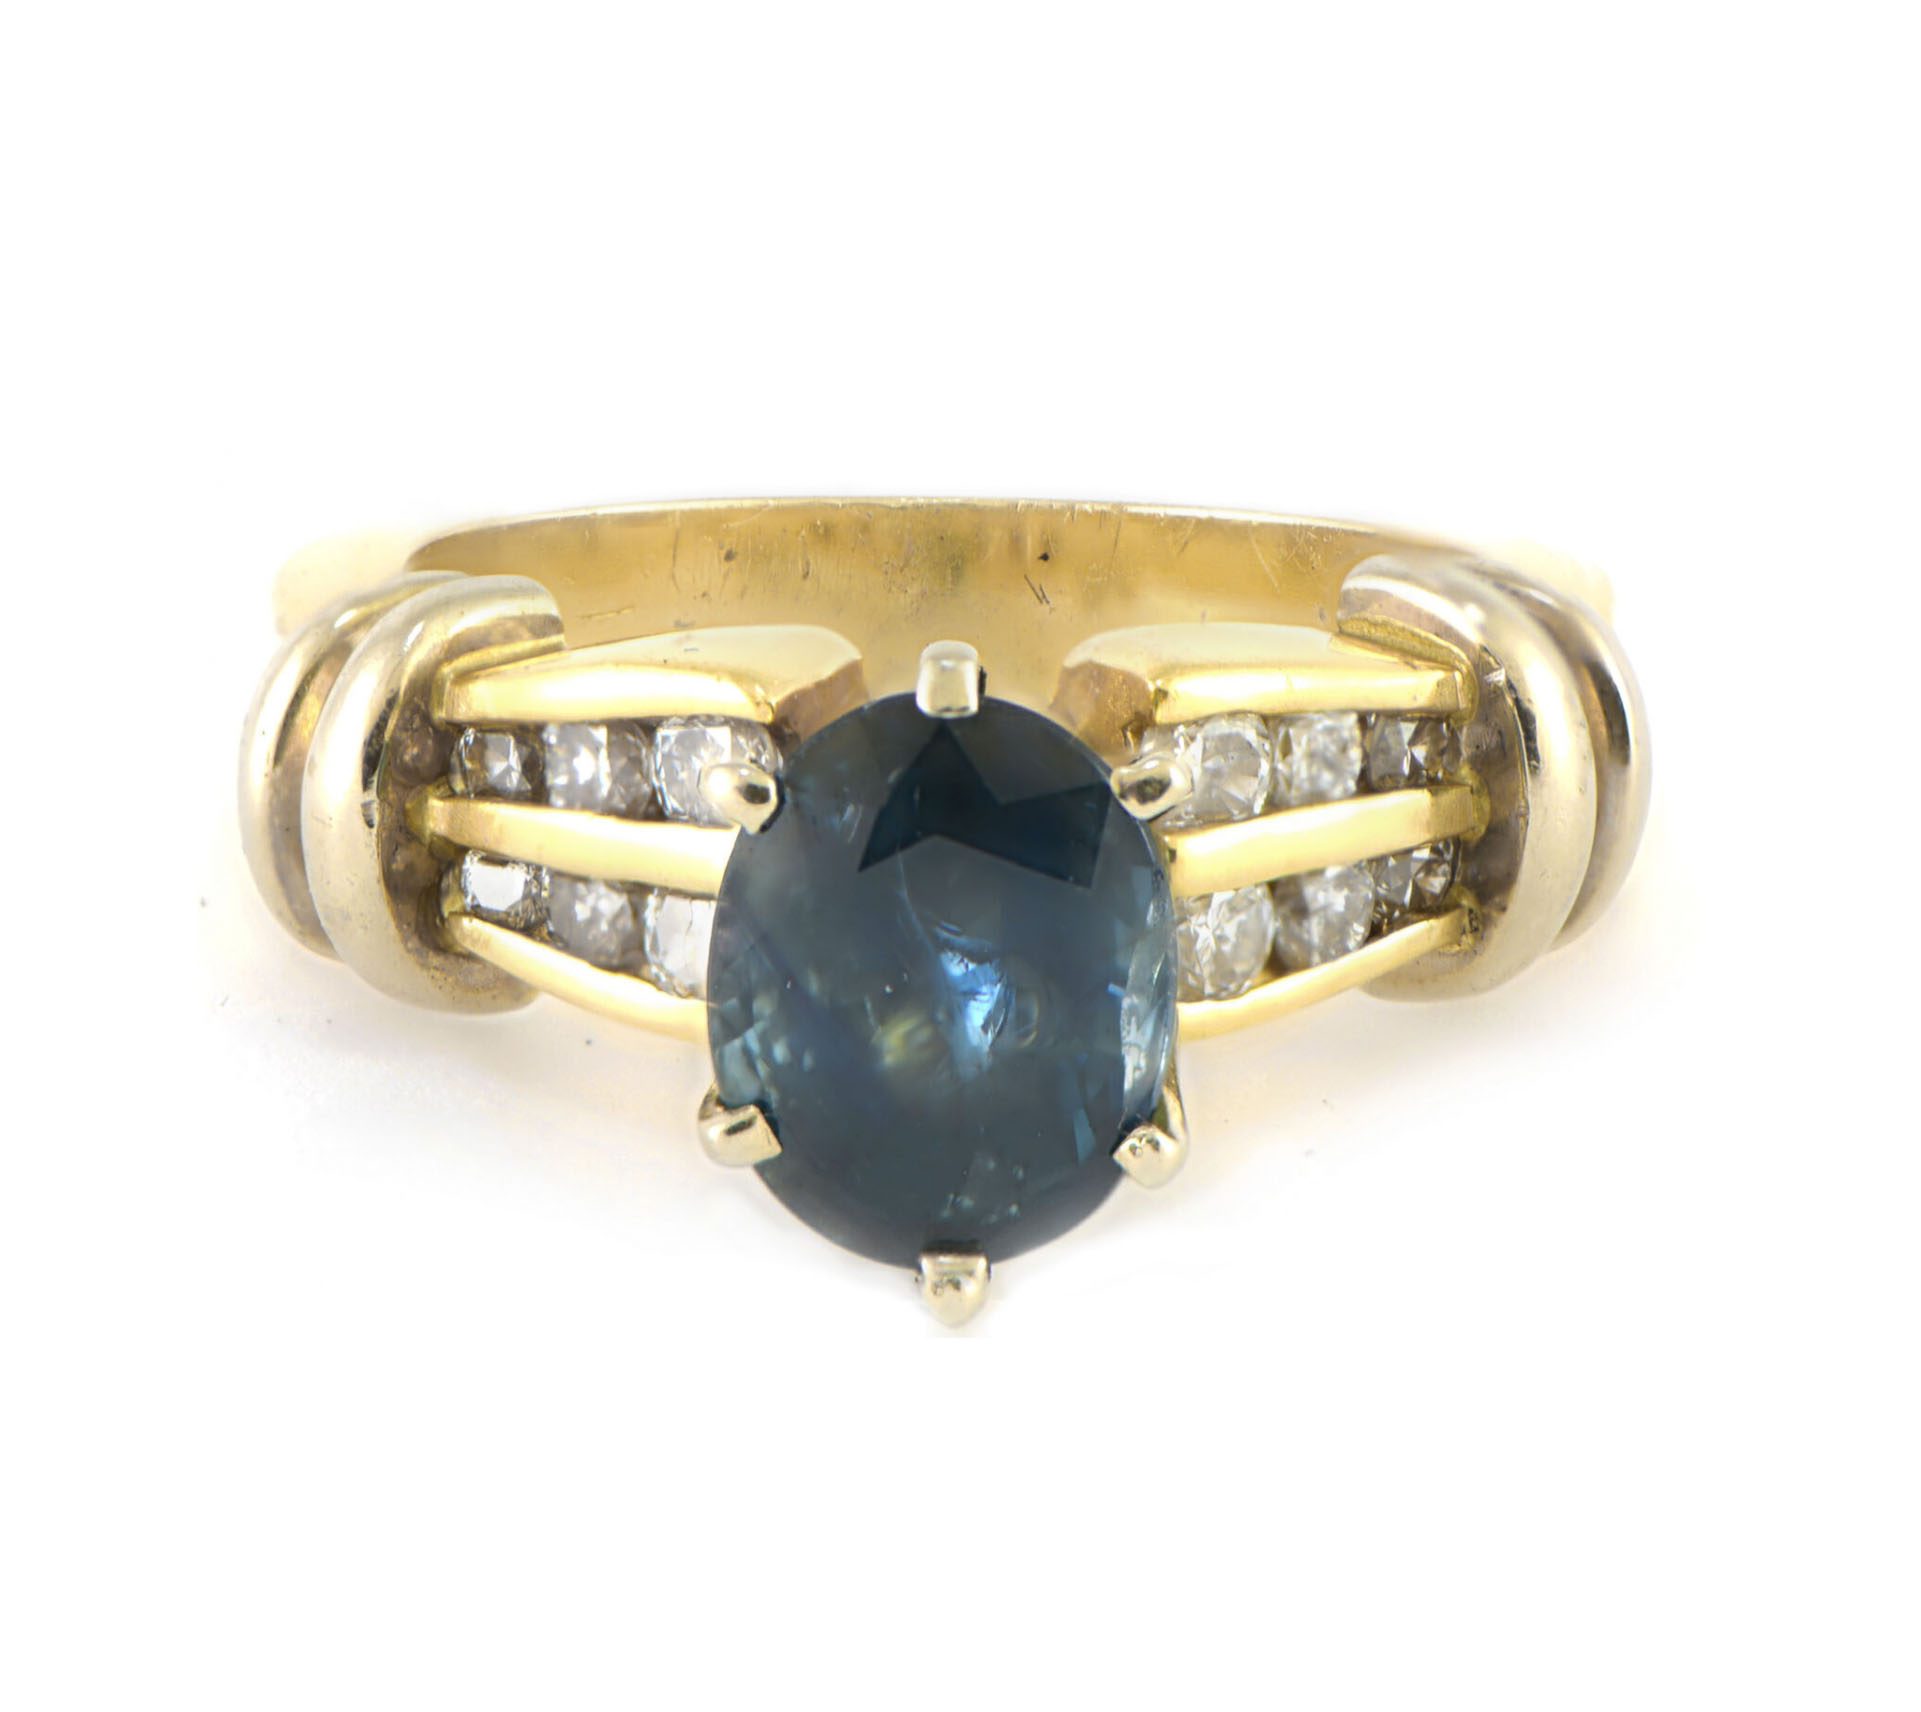 Oval-Sapphire-Engagement-Ring-Channel-Setting-Two-Tone-14k-Yellow-Gold-SZ-65-172745558684-1500x956